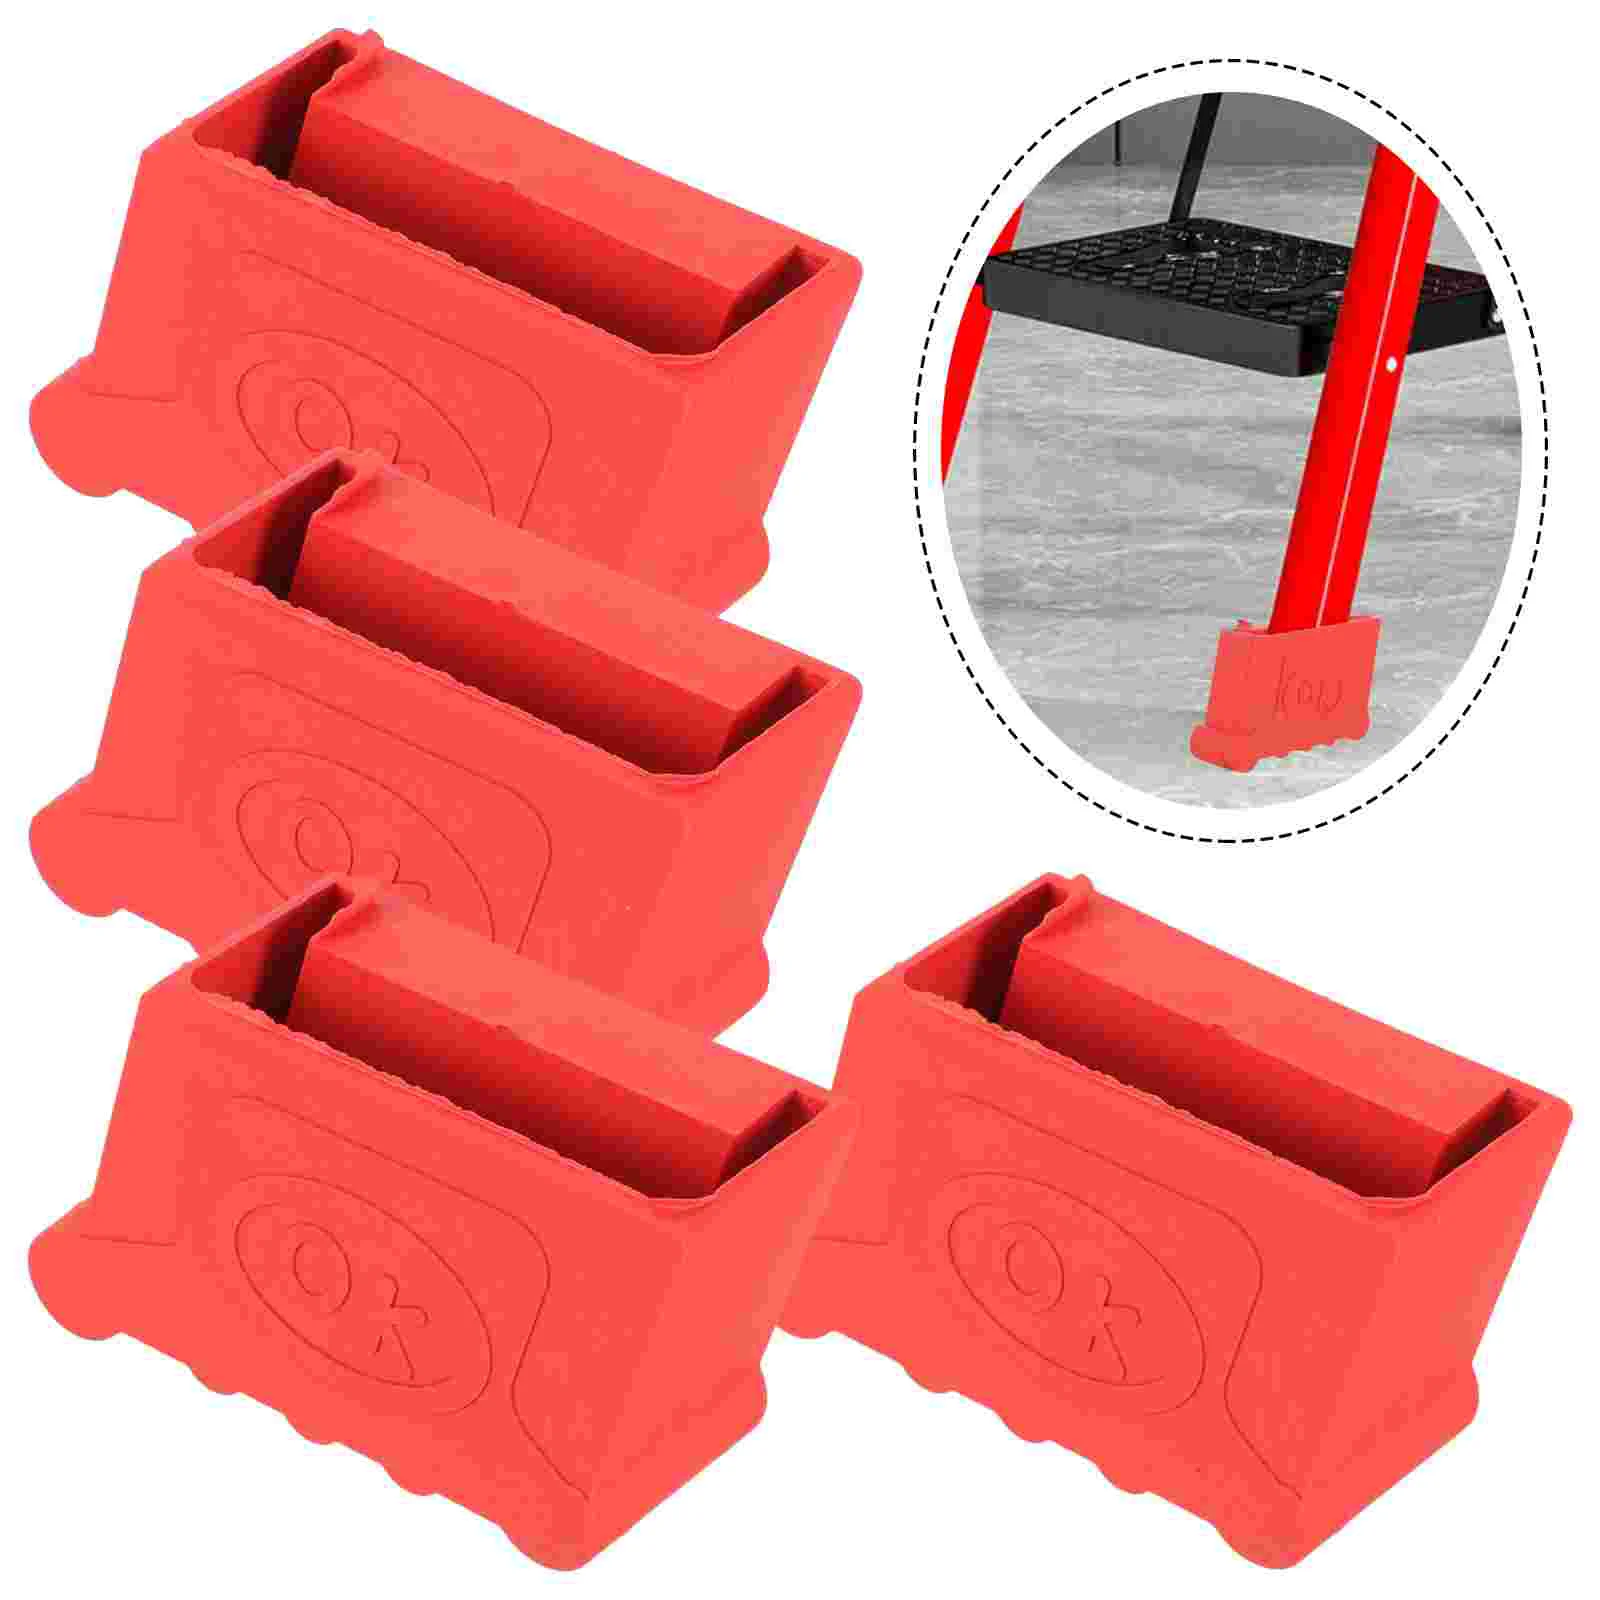 

4 pcs Convenient Antiskid Insulation Replacement Ladder Feet Cushion Household Ladder Cover